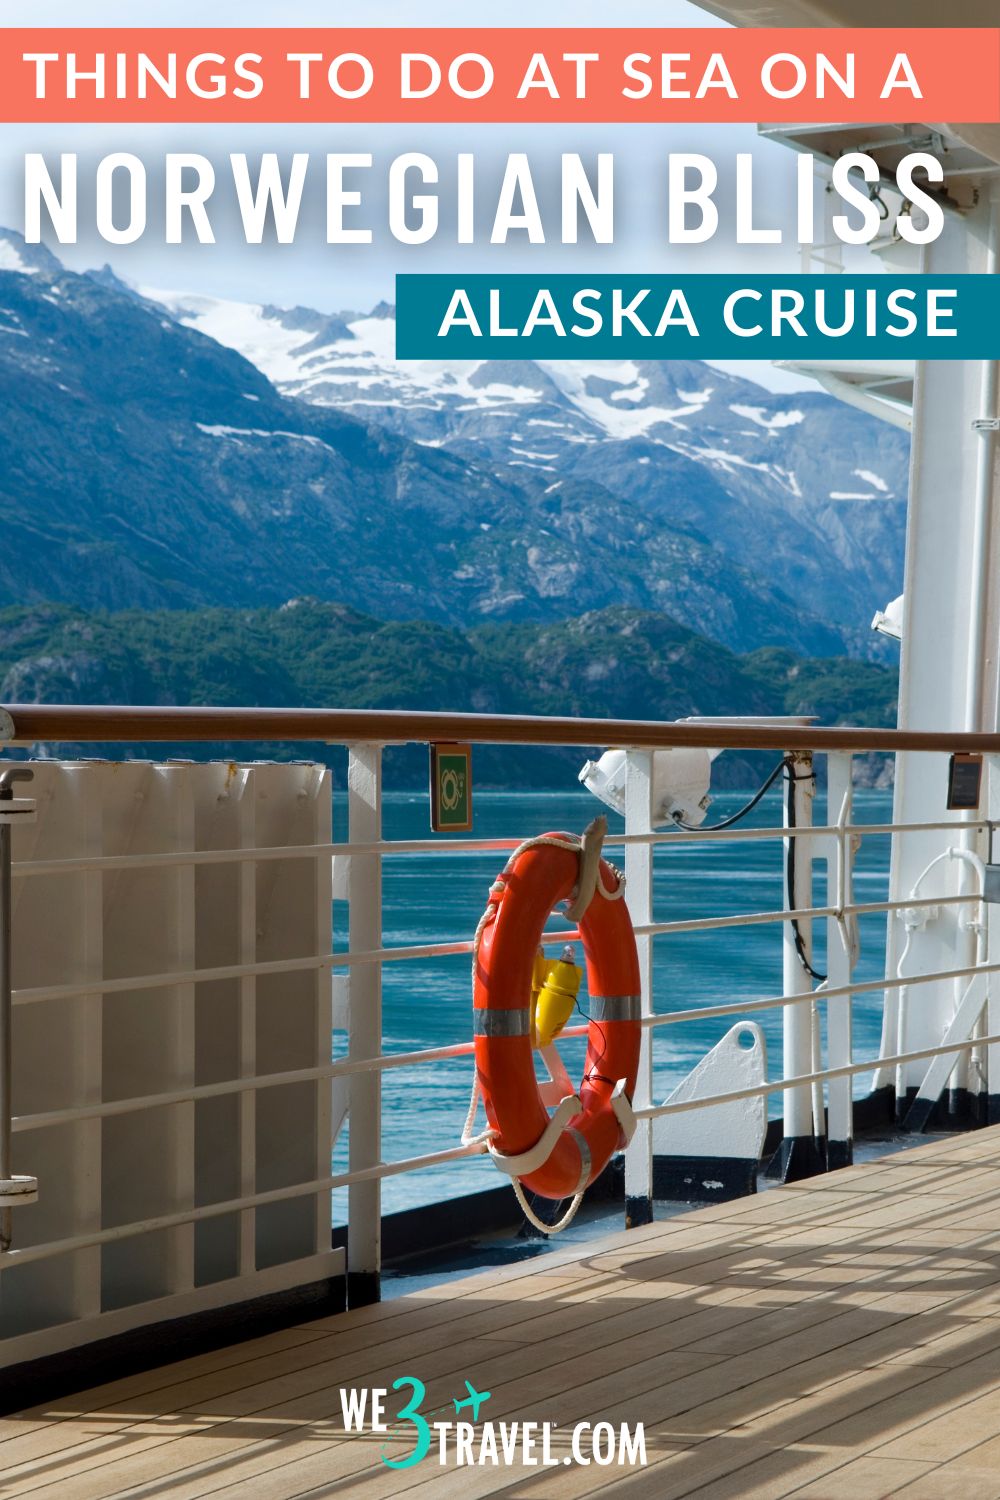 If you are planning a family vacation on an Alaska cruise on the Norwegian Bliss, check out these things to do while at sea on a Norwegian Alaska cruise.